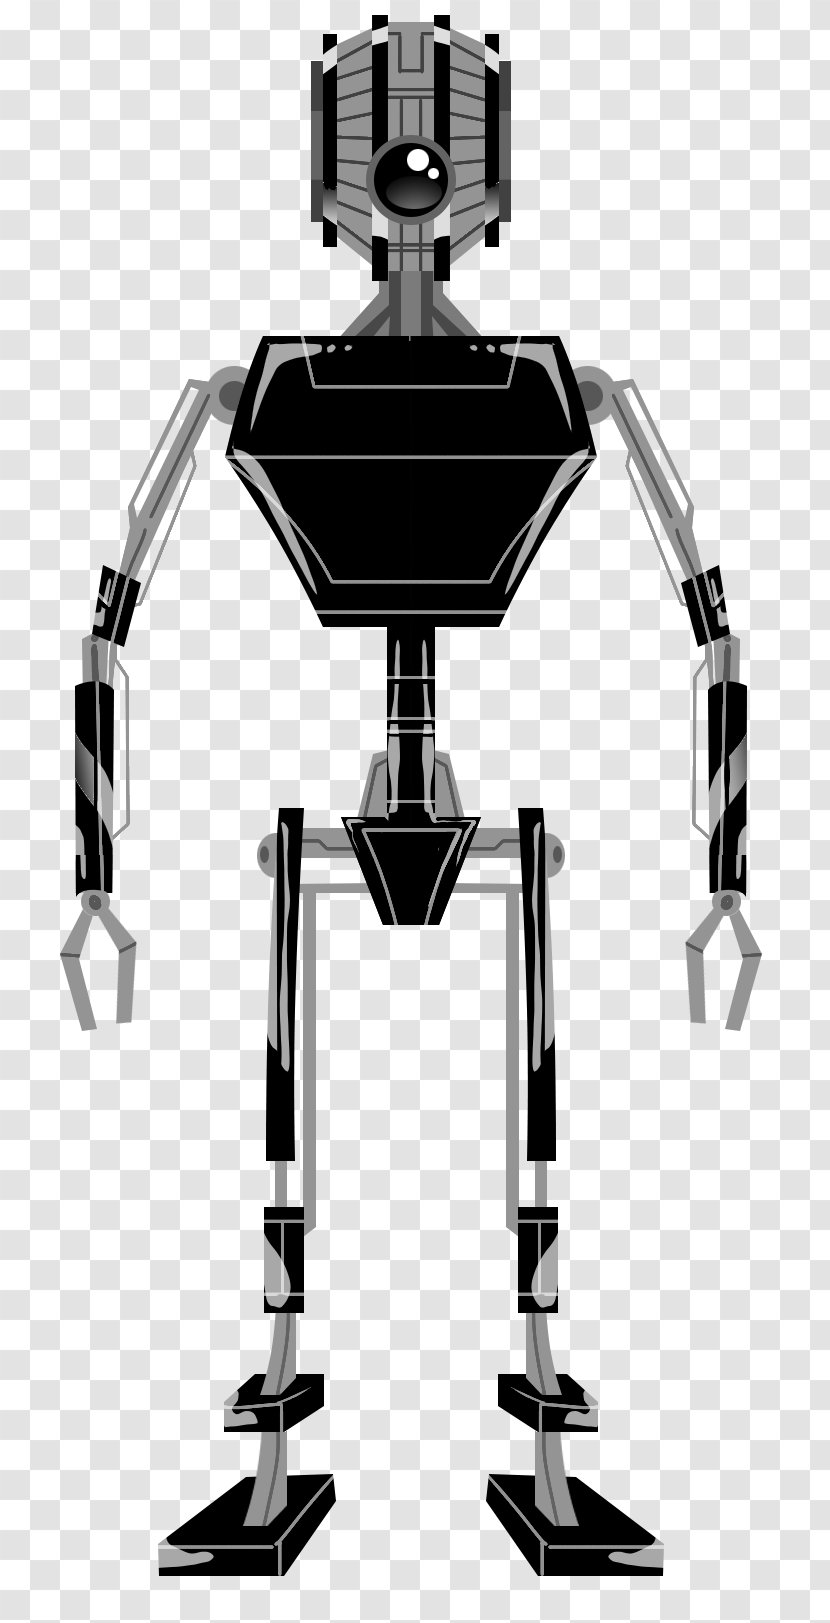 BB-8 Astromechdroid Robot Star Wars - Physical Science - East Transparent PNG